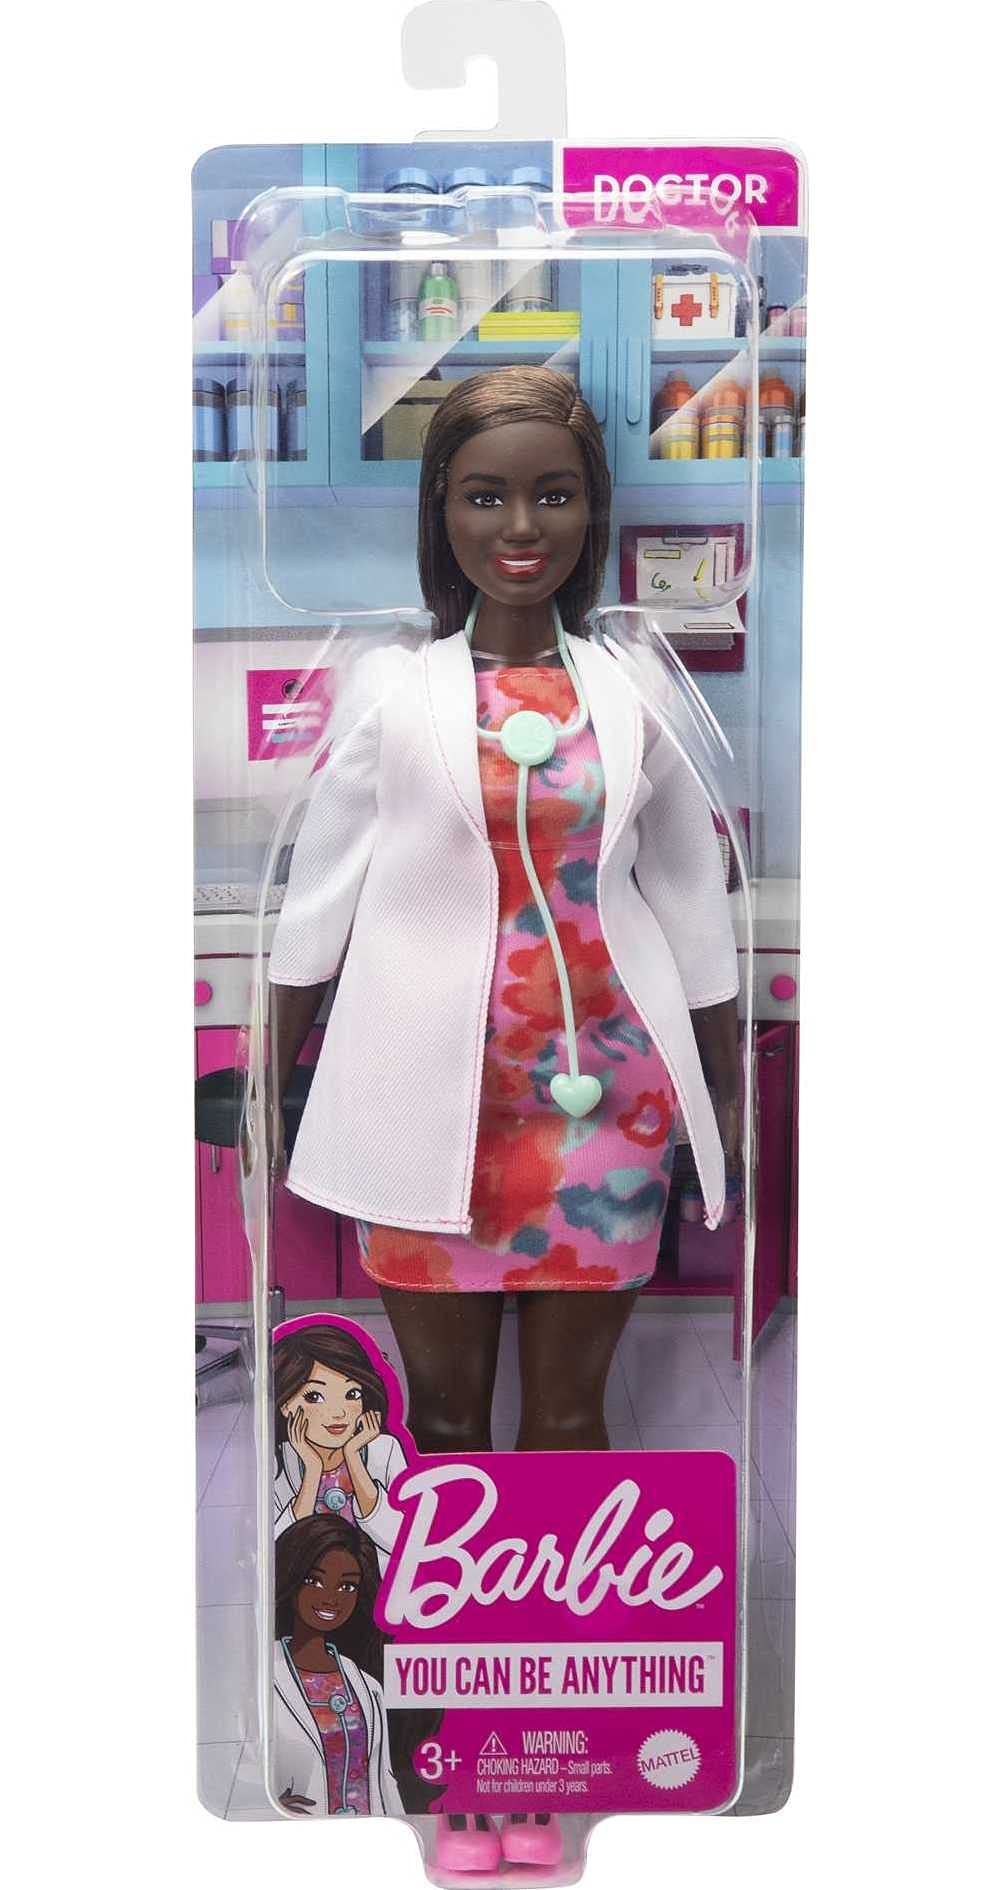 Barbie Doctor Doll (12-in/30.40-cm), Brunette Hair, Curvy Shape, Doctor Coat, Print Dress, Stethoscope Accessory, Great Toy Gift for Ages 3 Years Old & Up , White